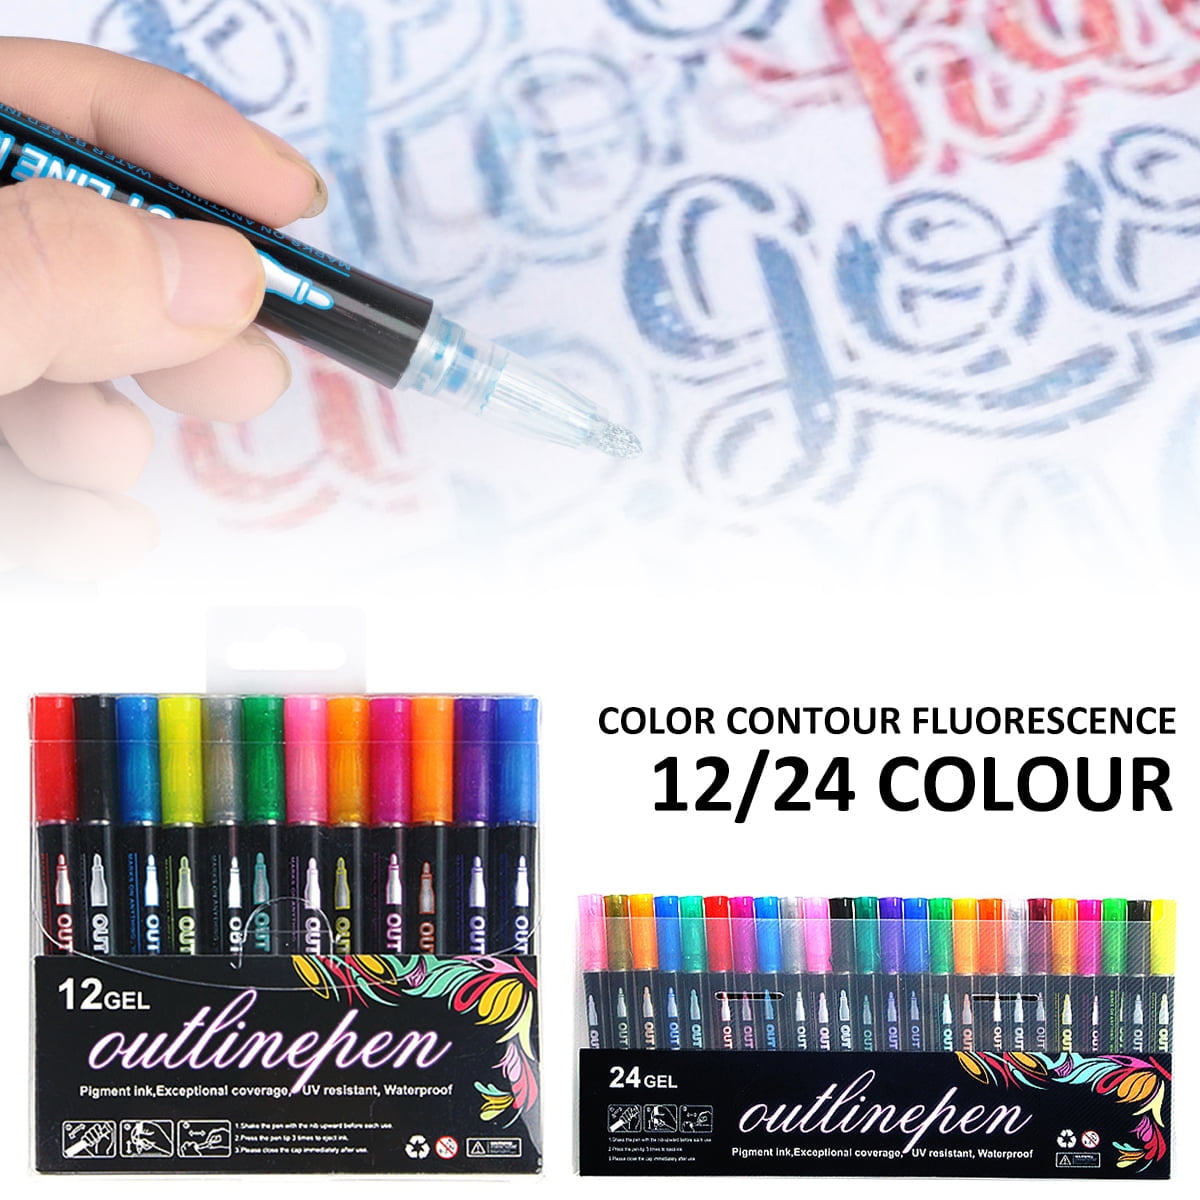 Shimmer Markers Double Line Outline: 20 Colors Metallic Glitter Pen Set  Super Squiggles Sparkle Kid Age 4 8 10 12 24 Christmas Gift Cool Dazzles